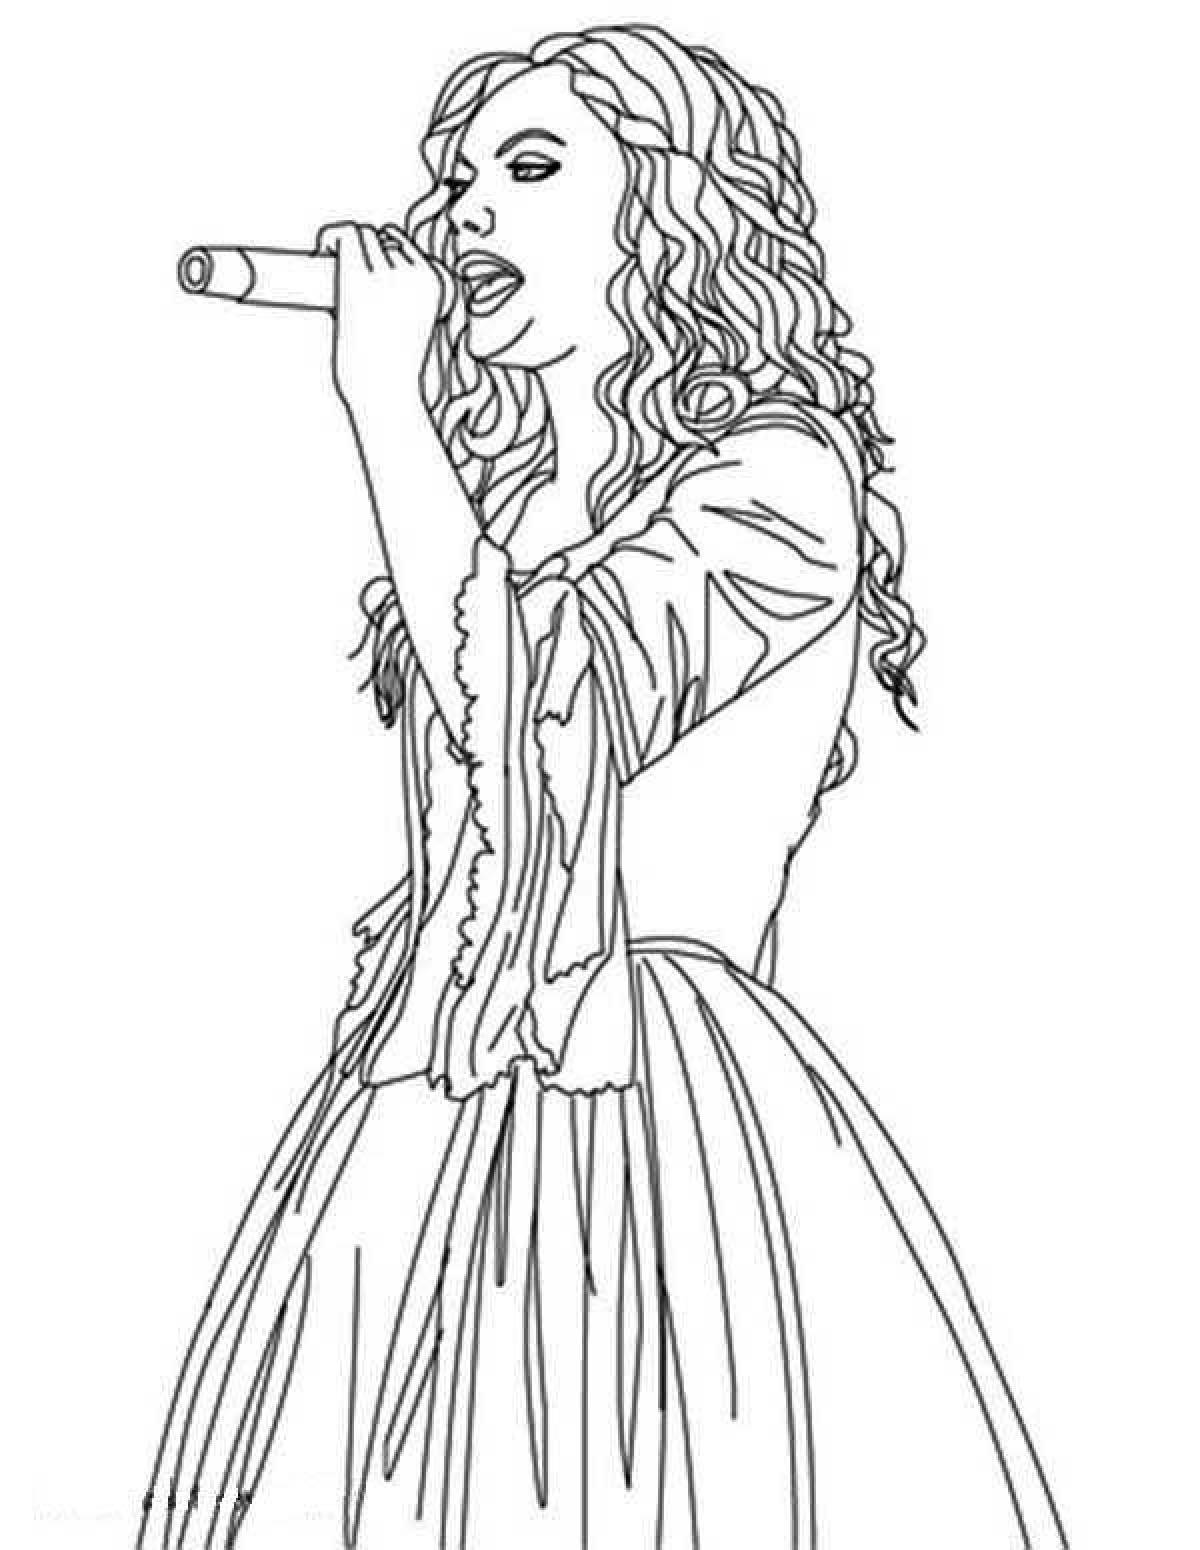 Singer animated coloring page